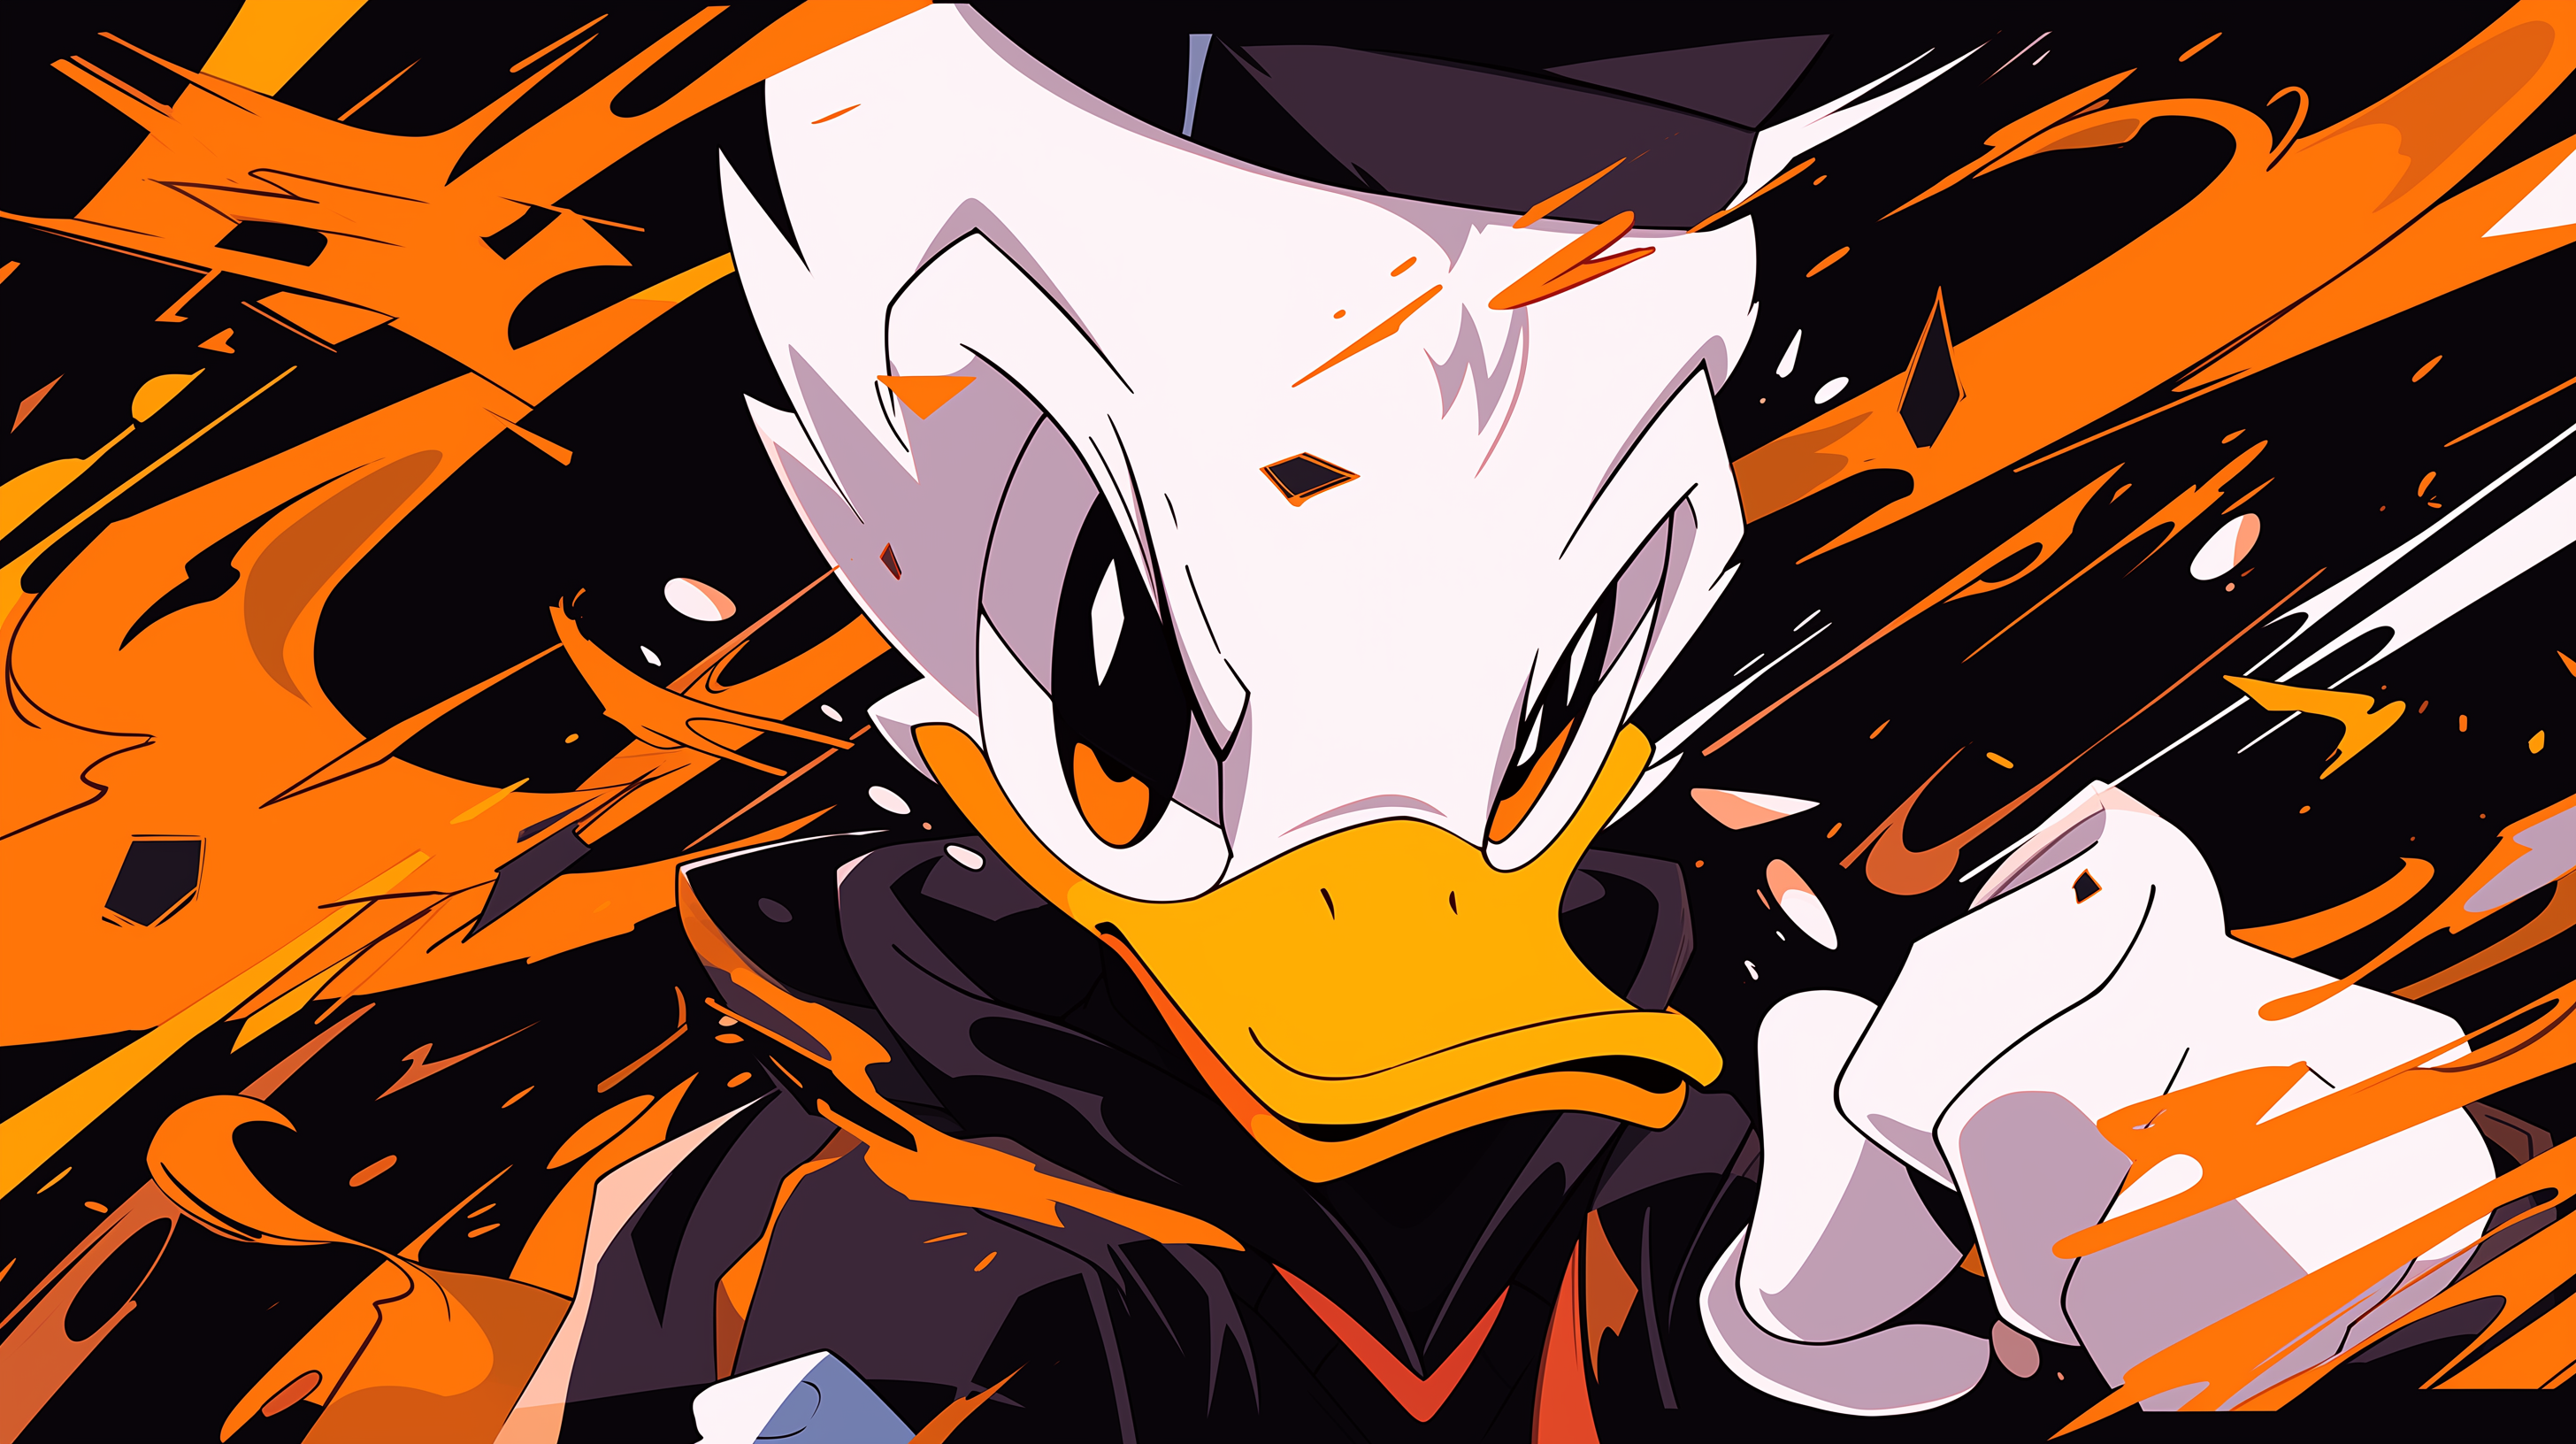 HD wallpaper featuring an animated depiction of Disney's Donald Duck with dynamic orange and black splashes in the background.